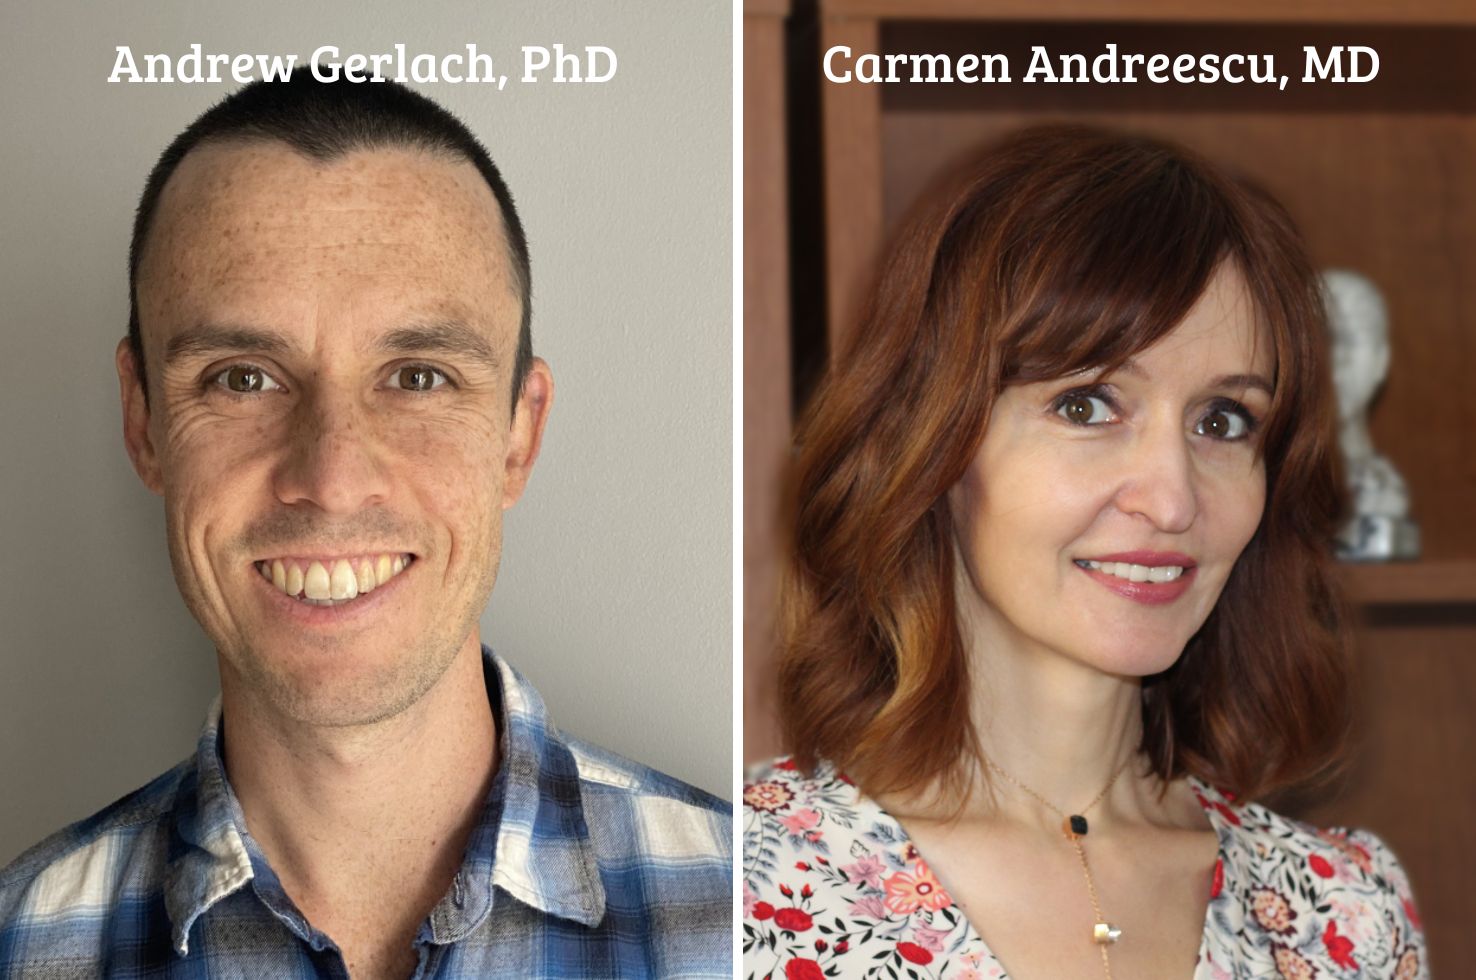 Drs. Andrew Gerlach and Carmen Andreescu